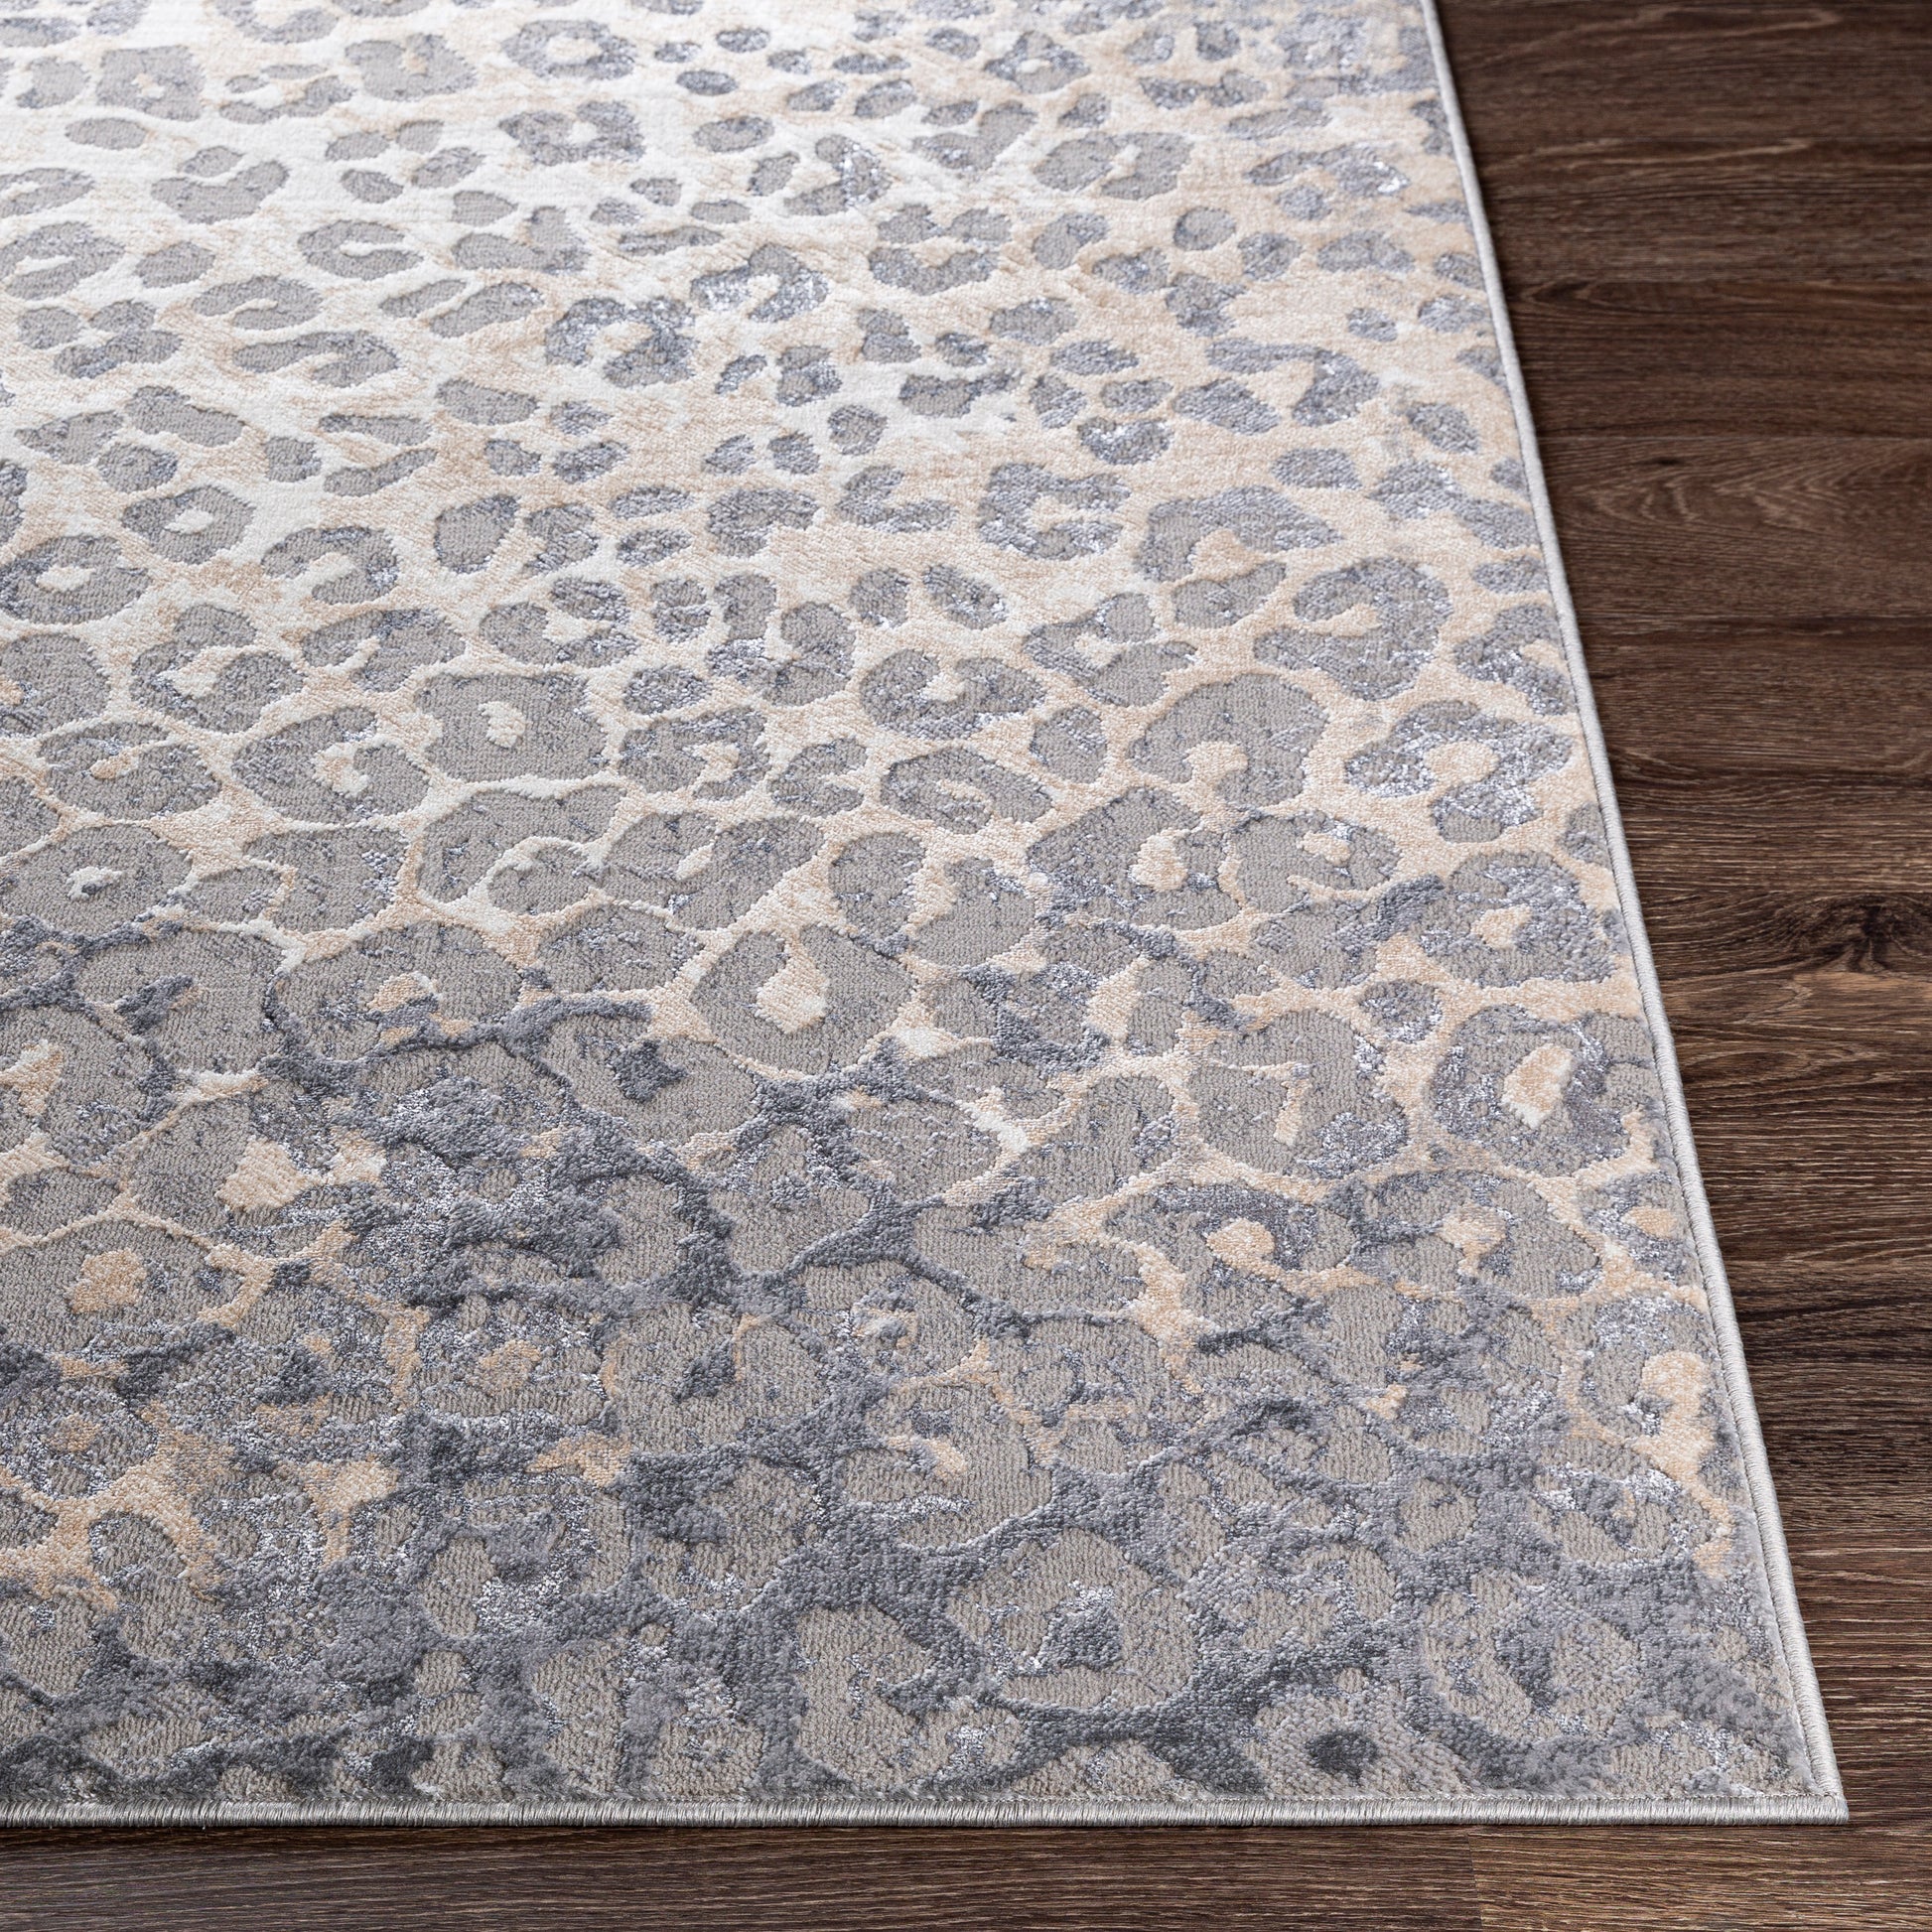 Surya Perception Pcp-2302 Taupe, Beige, Light Gray, Charcoal Area Rug